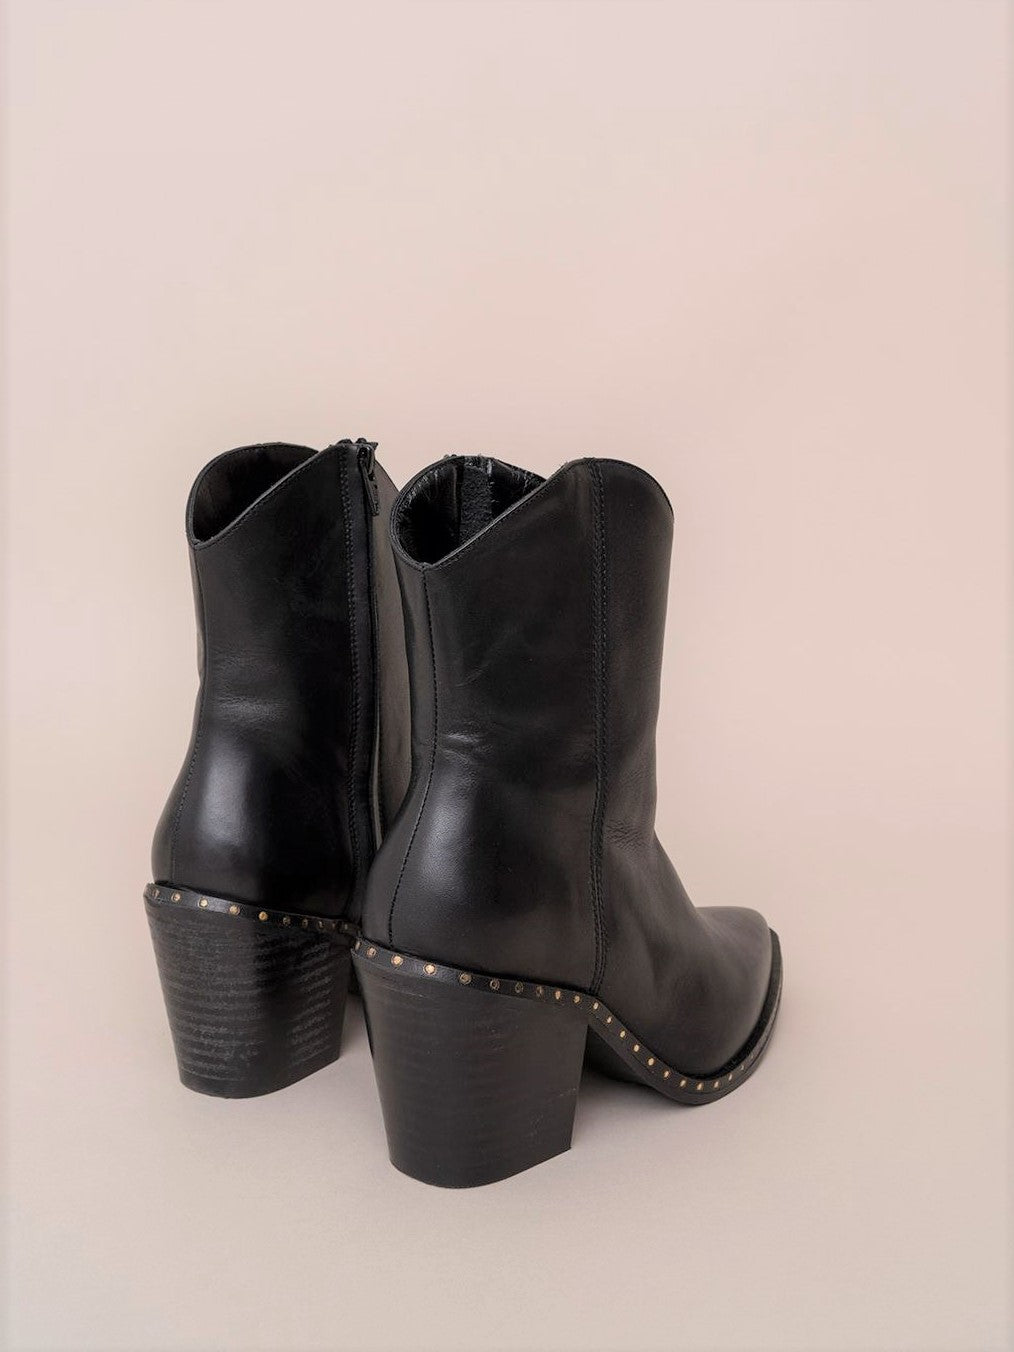 Stud detailed Cowboy Ankle Booties